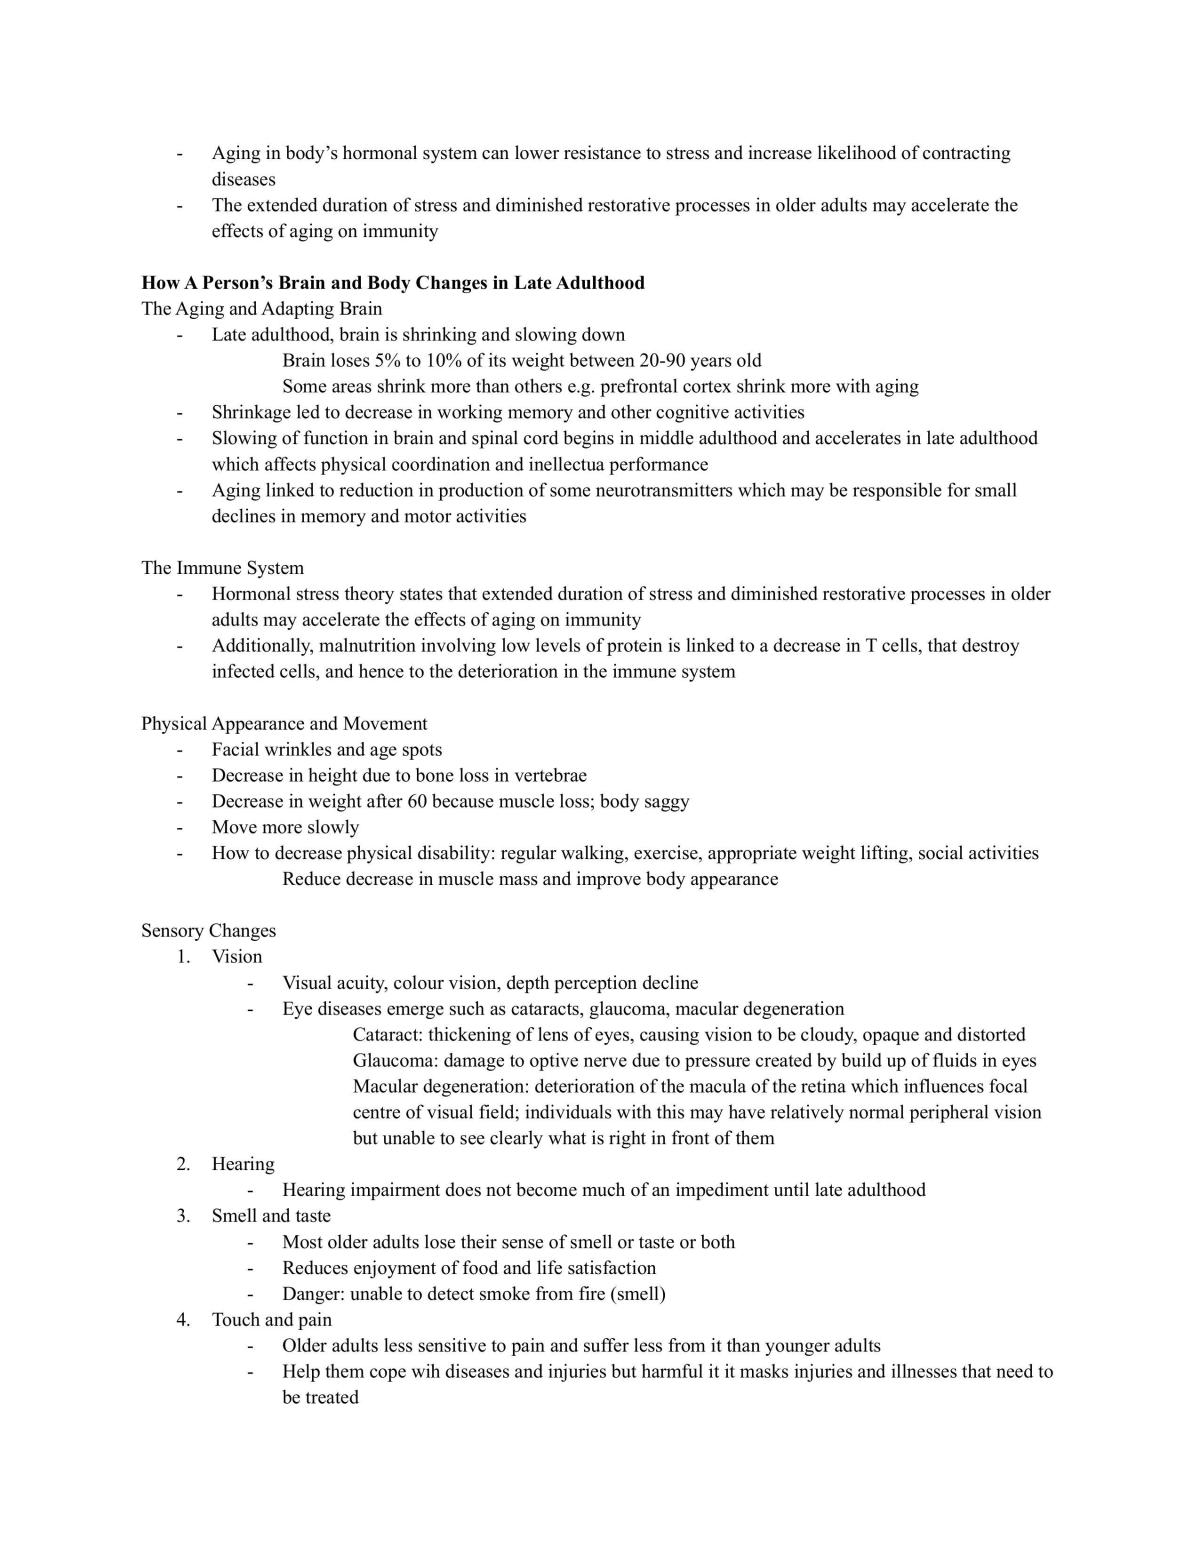 SWK105 Notes - Page 26